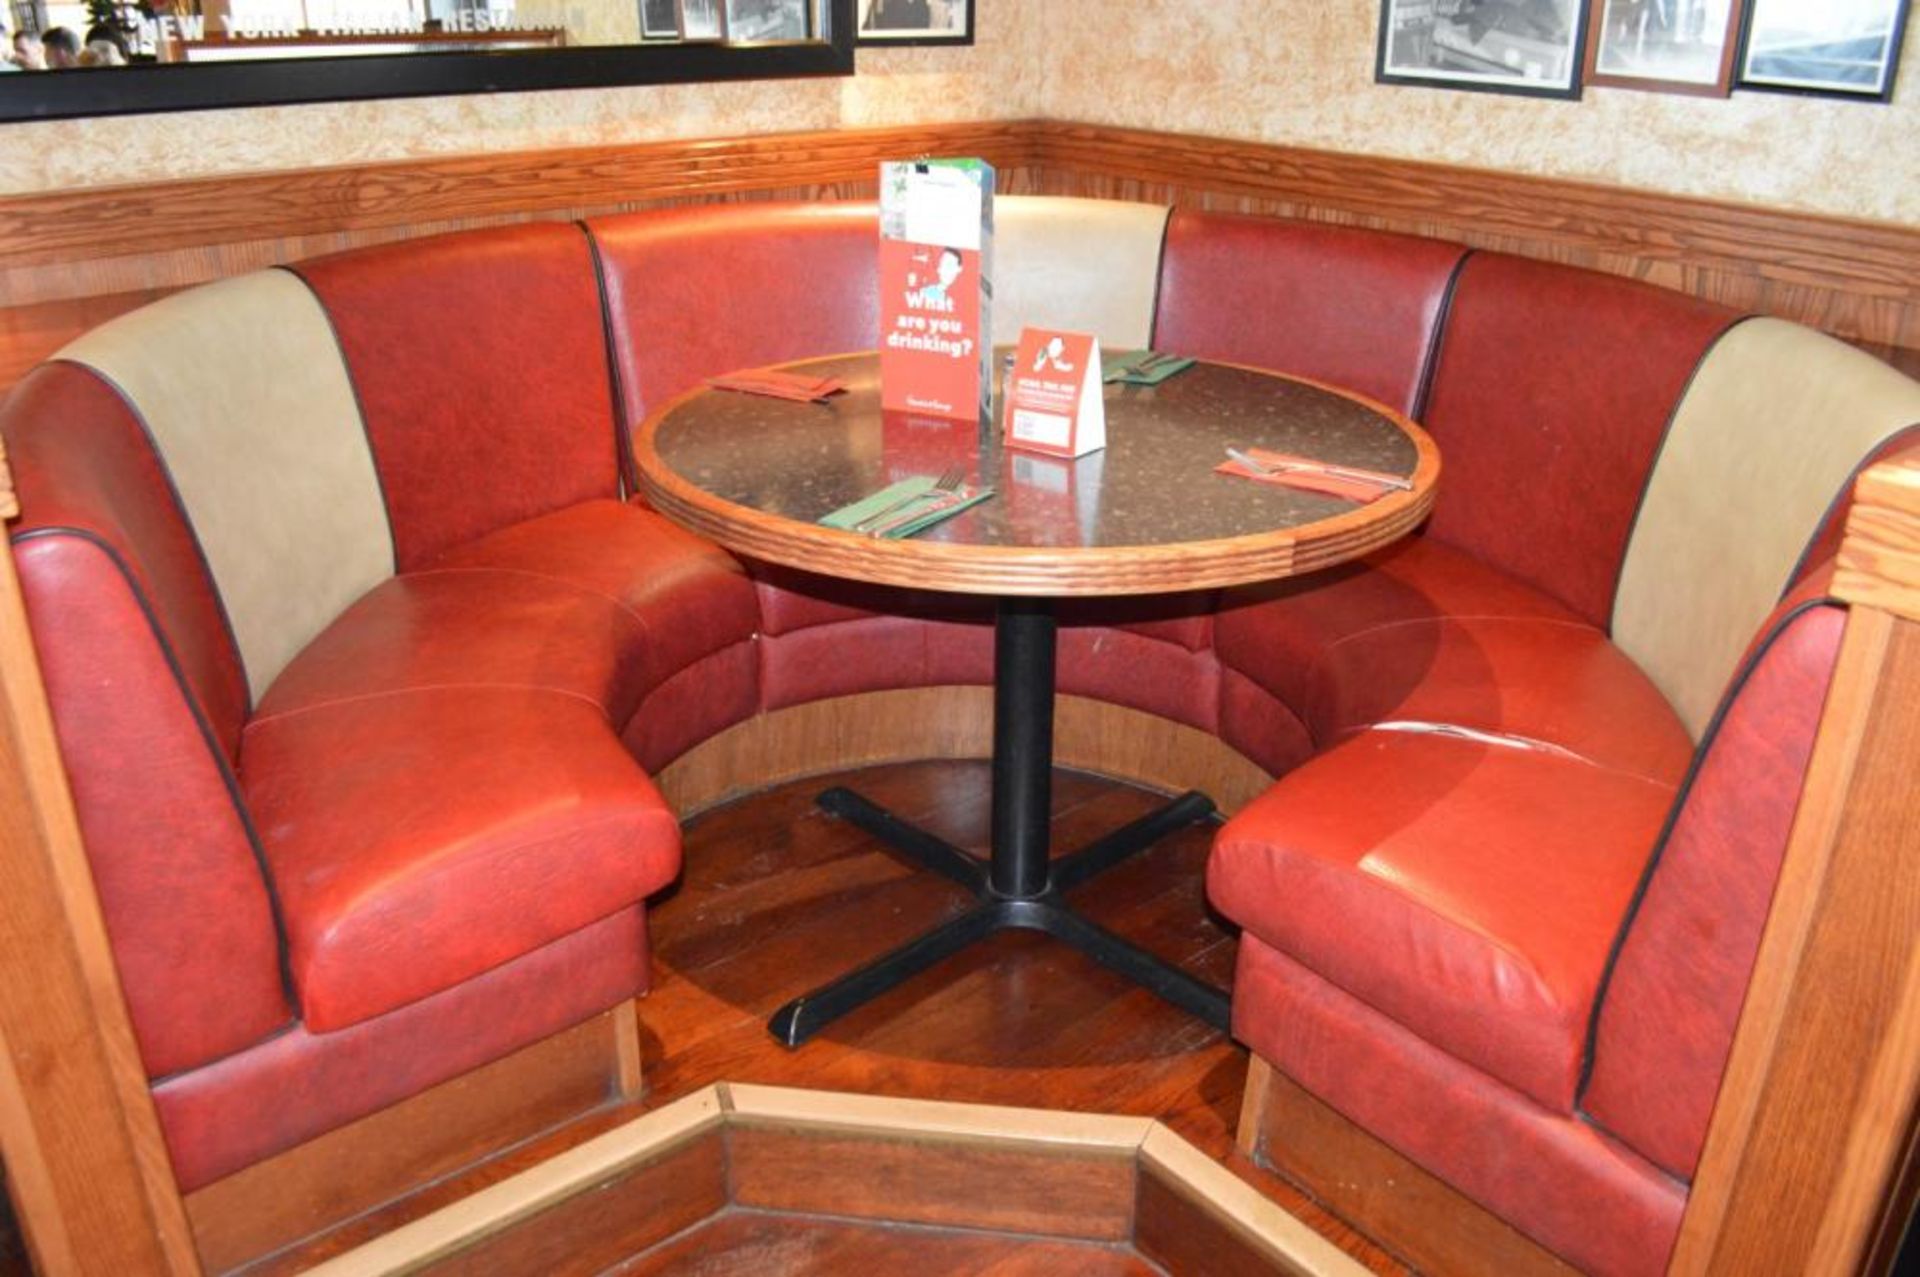 1 x Seating Booth in a 1950's Retro American Diner Design - Upholstered With Red and Cream Faux Leat